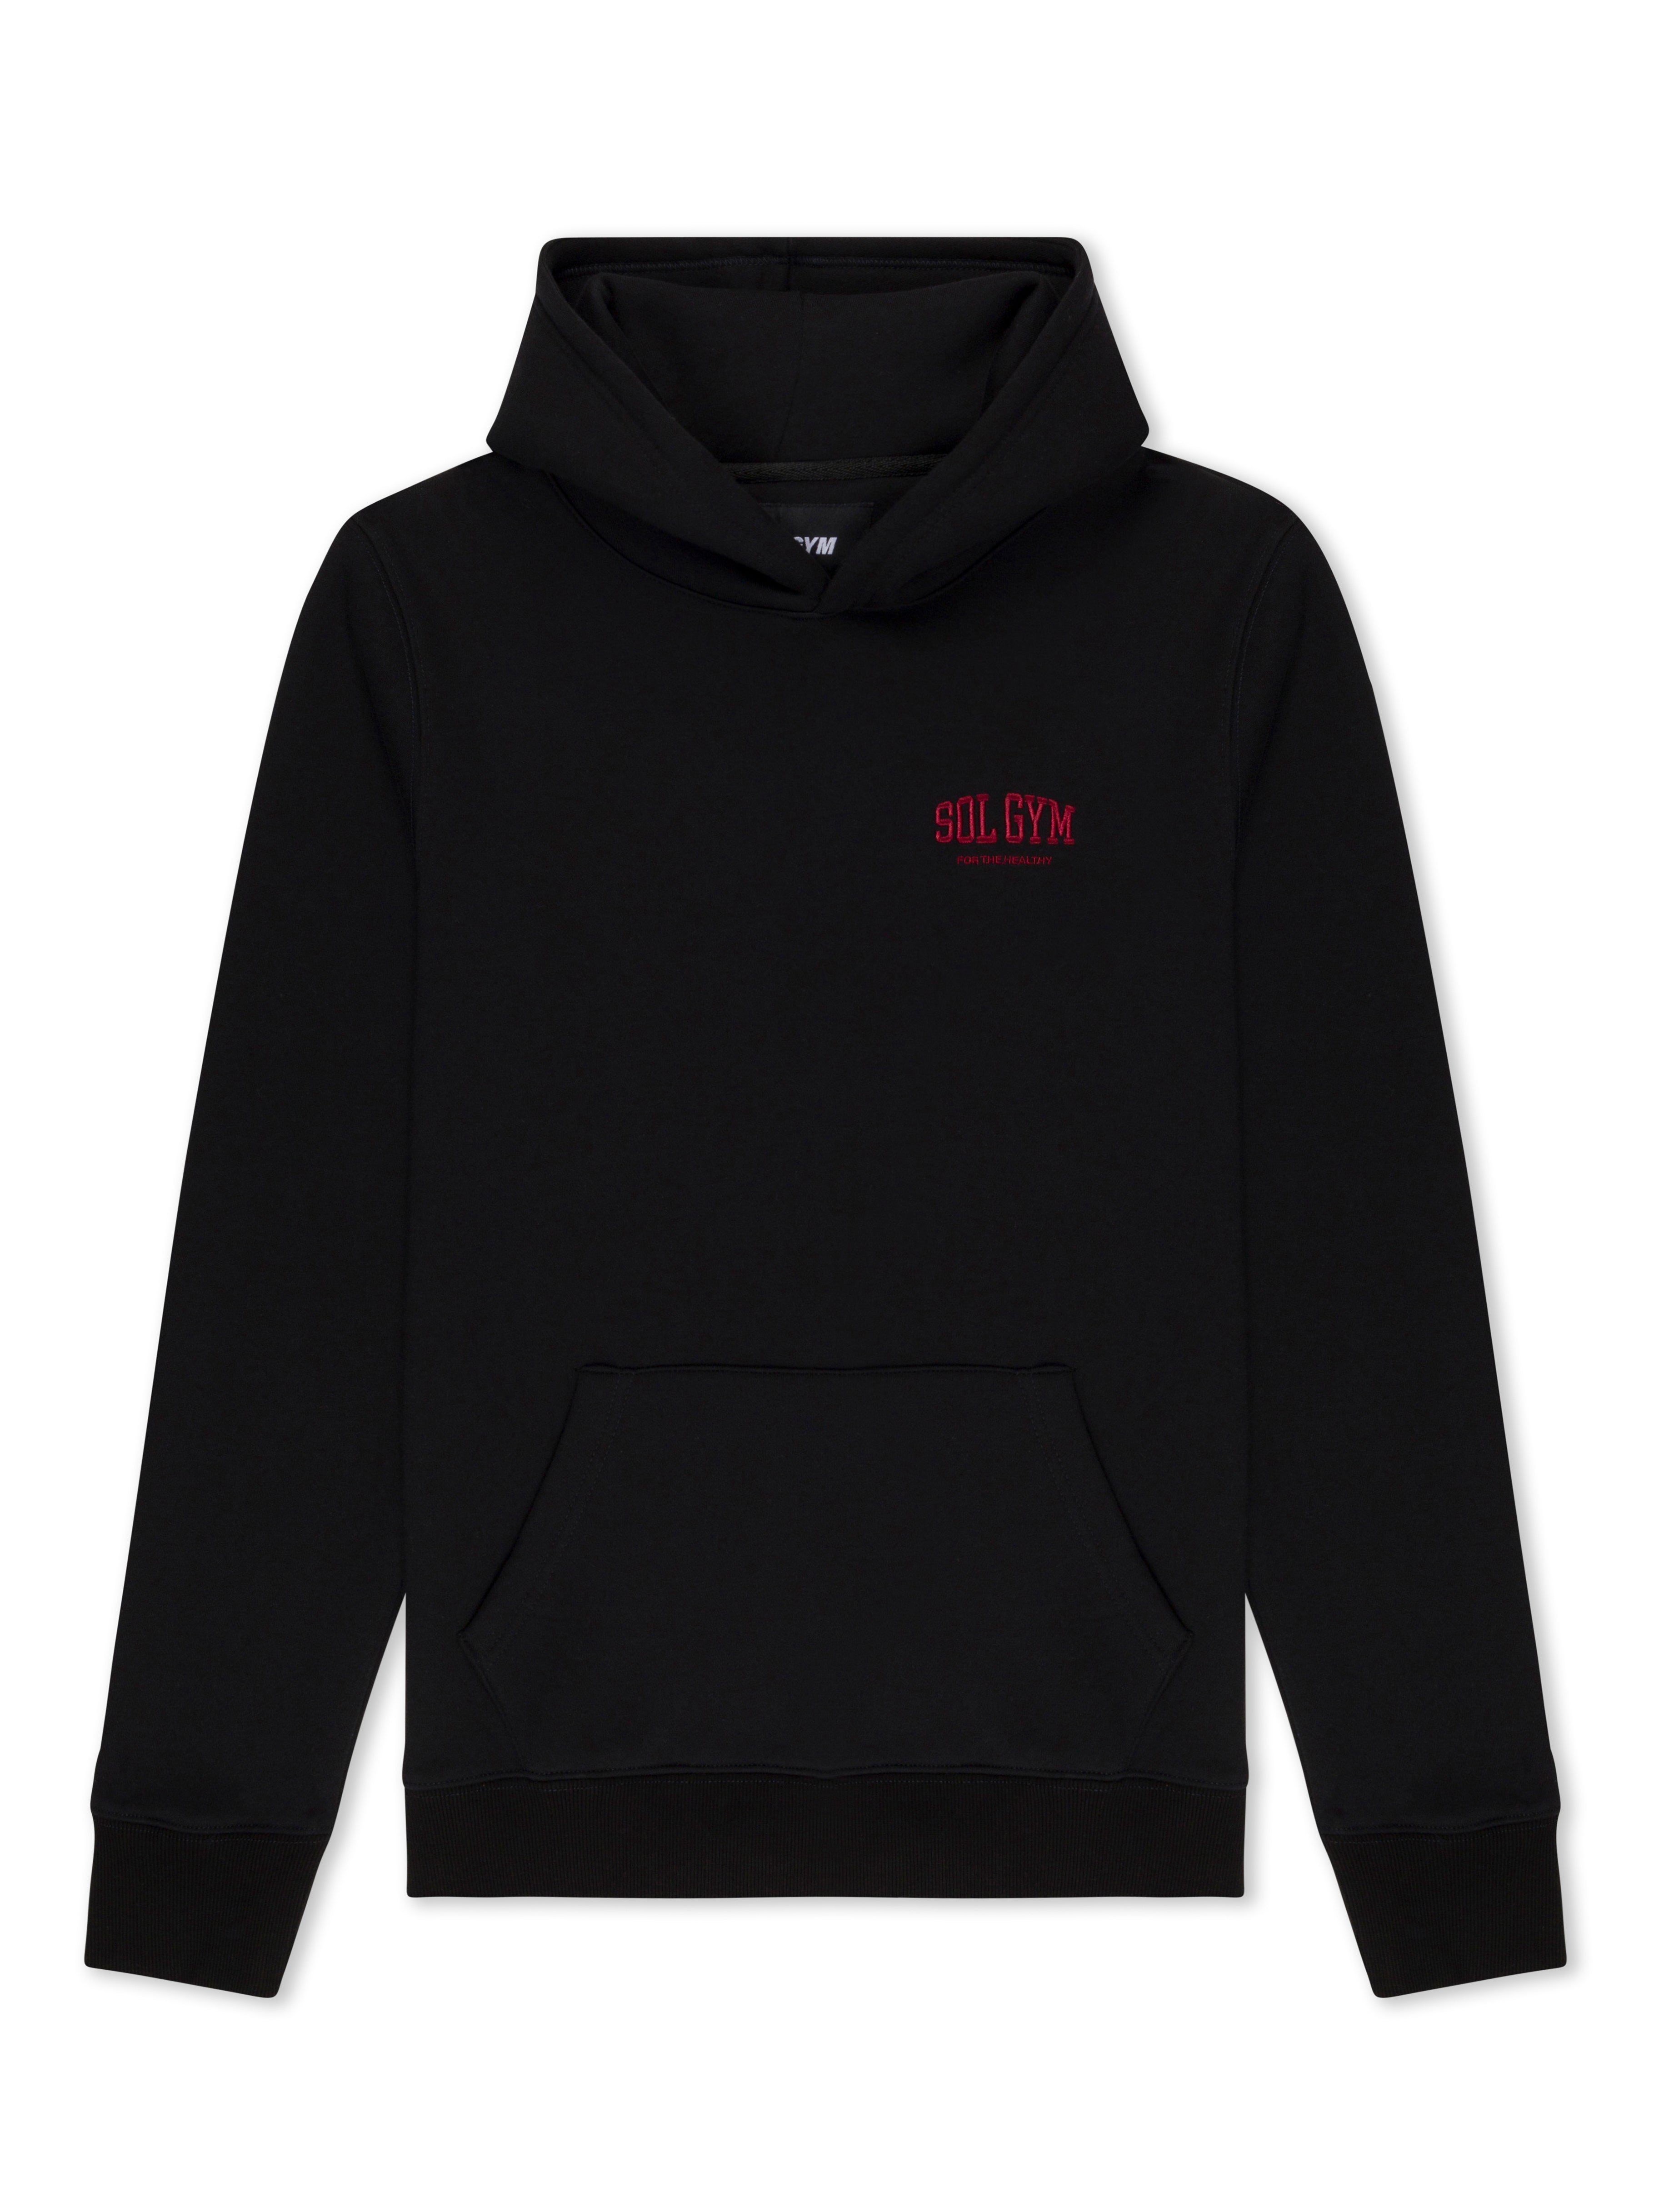 'For the Healthy' Cotton Sport Hoodie, Black